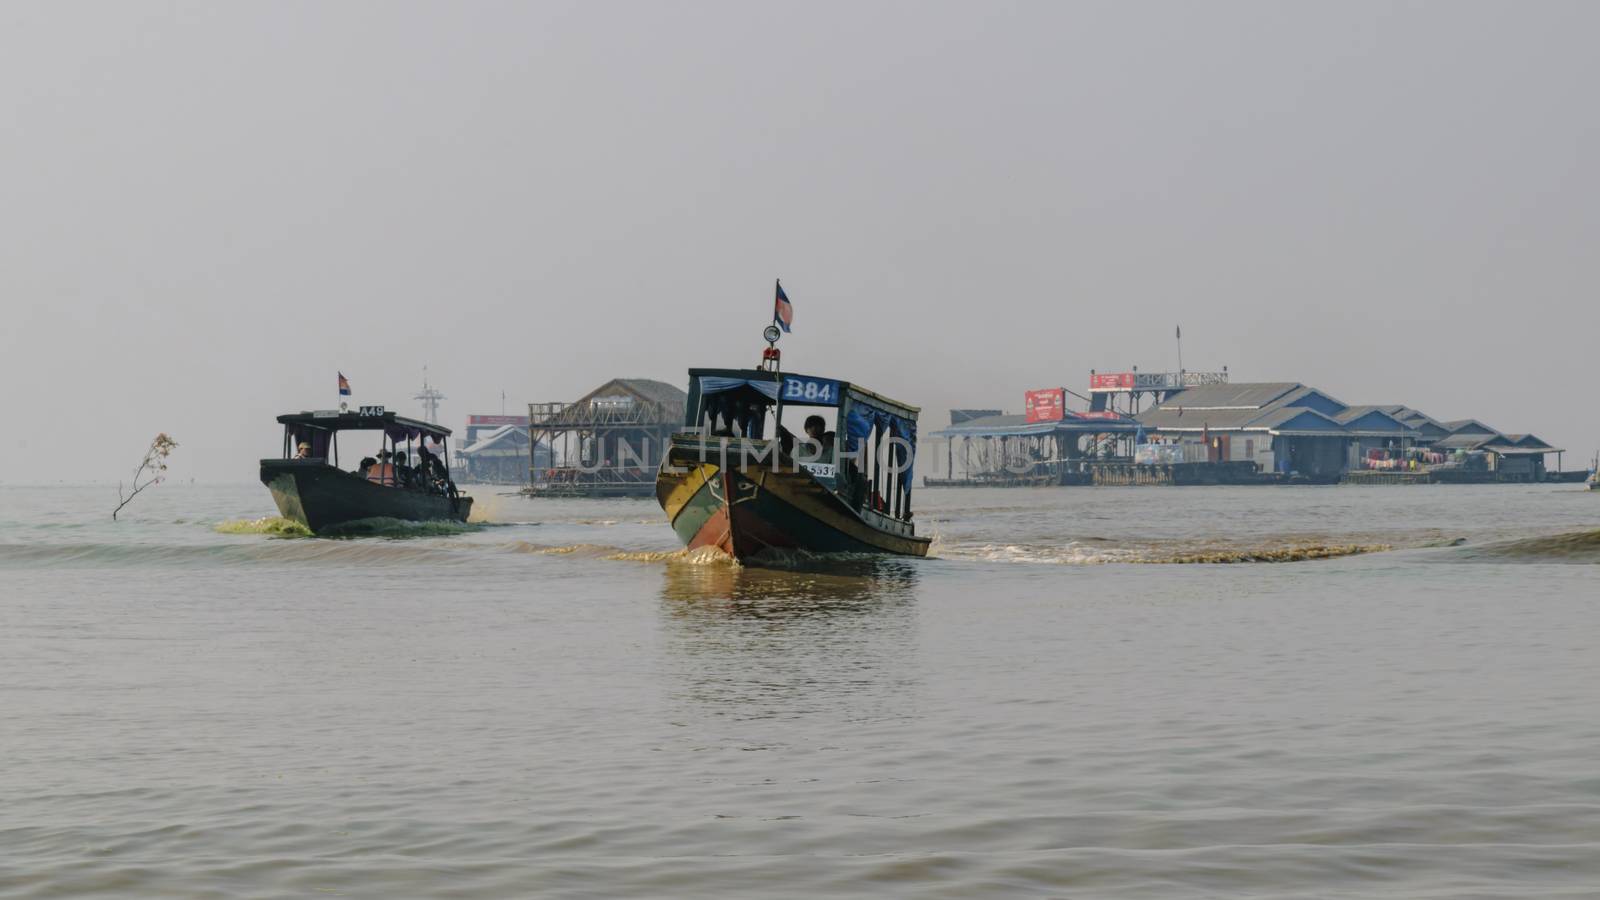 Cambodia, Tonle Sap Floating Village - March 2016: The water buses shuttle people to and from their destinations in the floating village